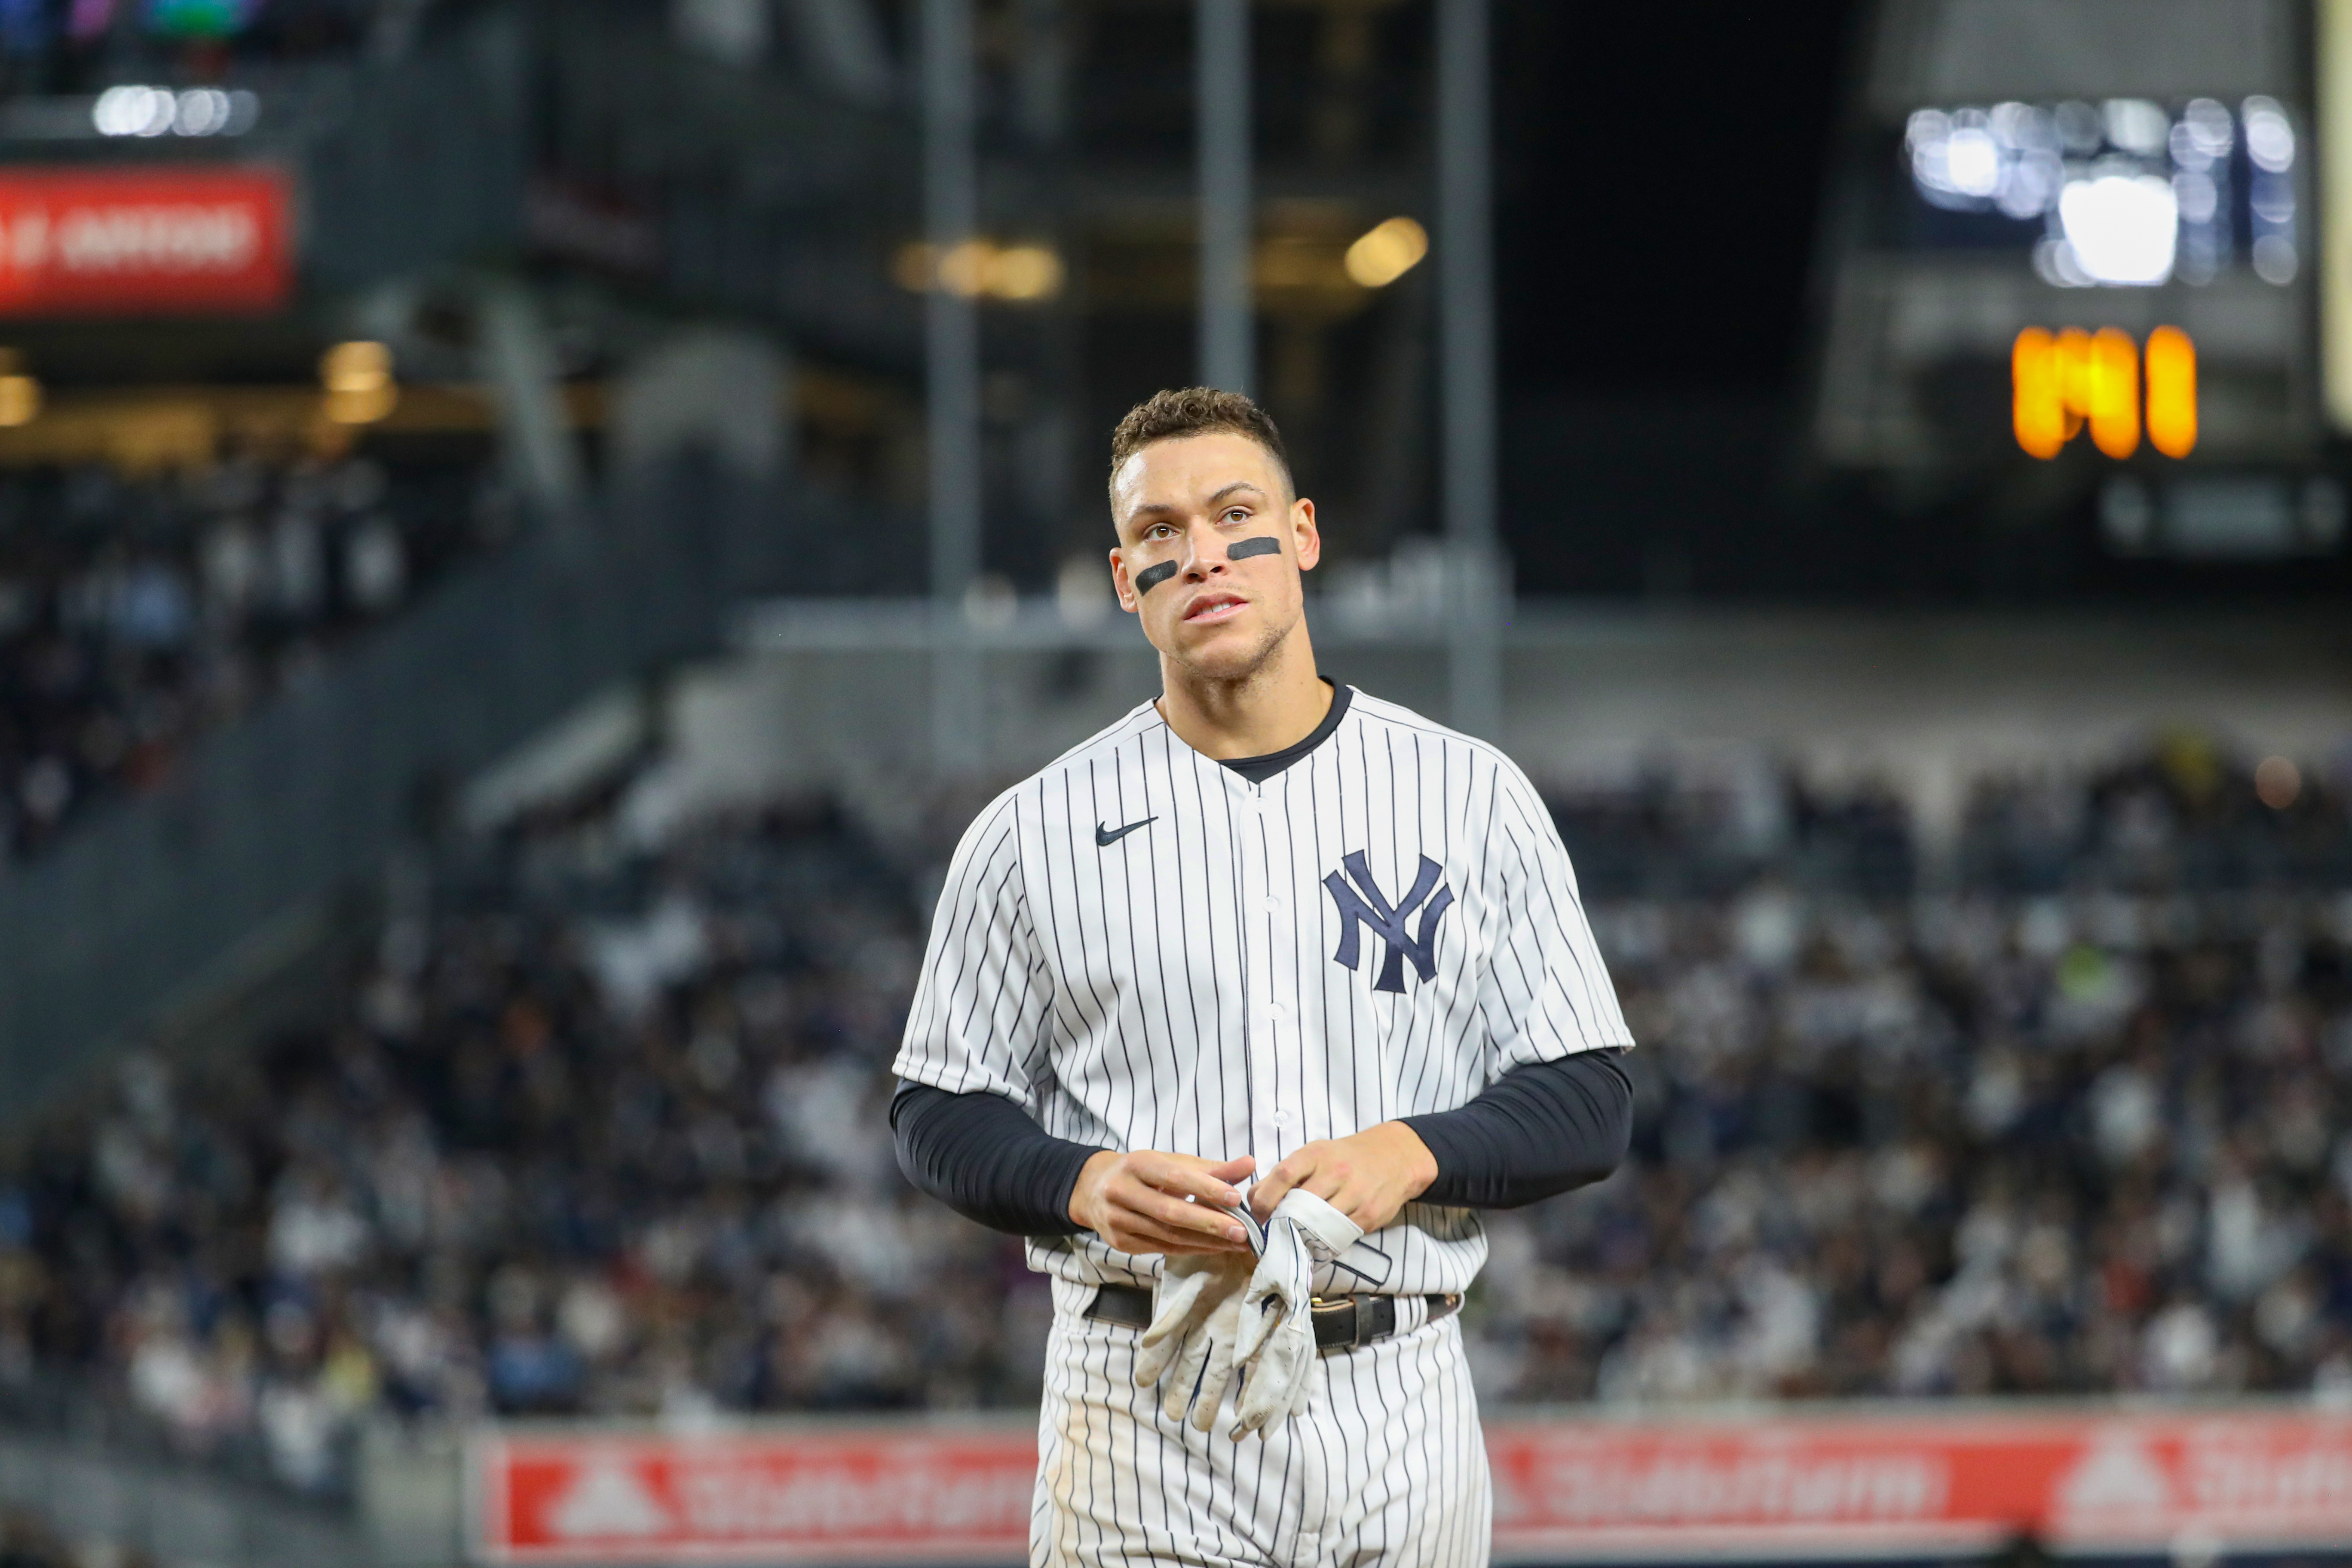 Jose Canseco urges Aaron Judge to leave Yankees: The place is a dump